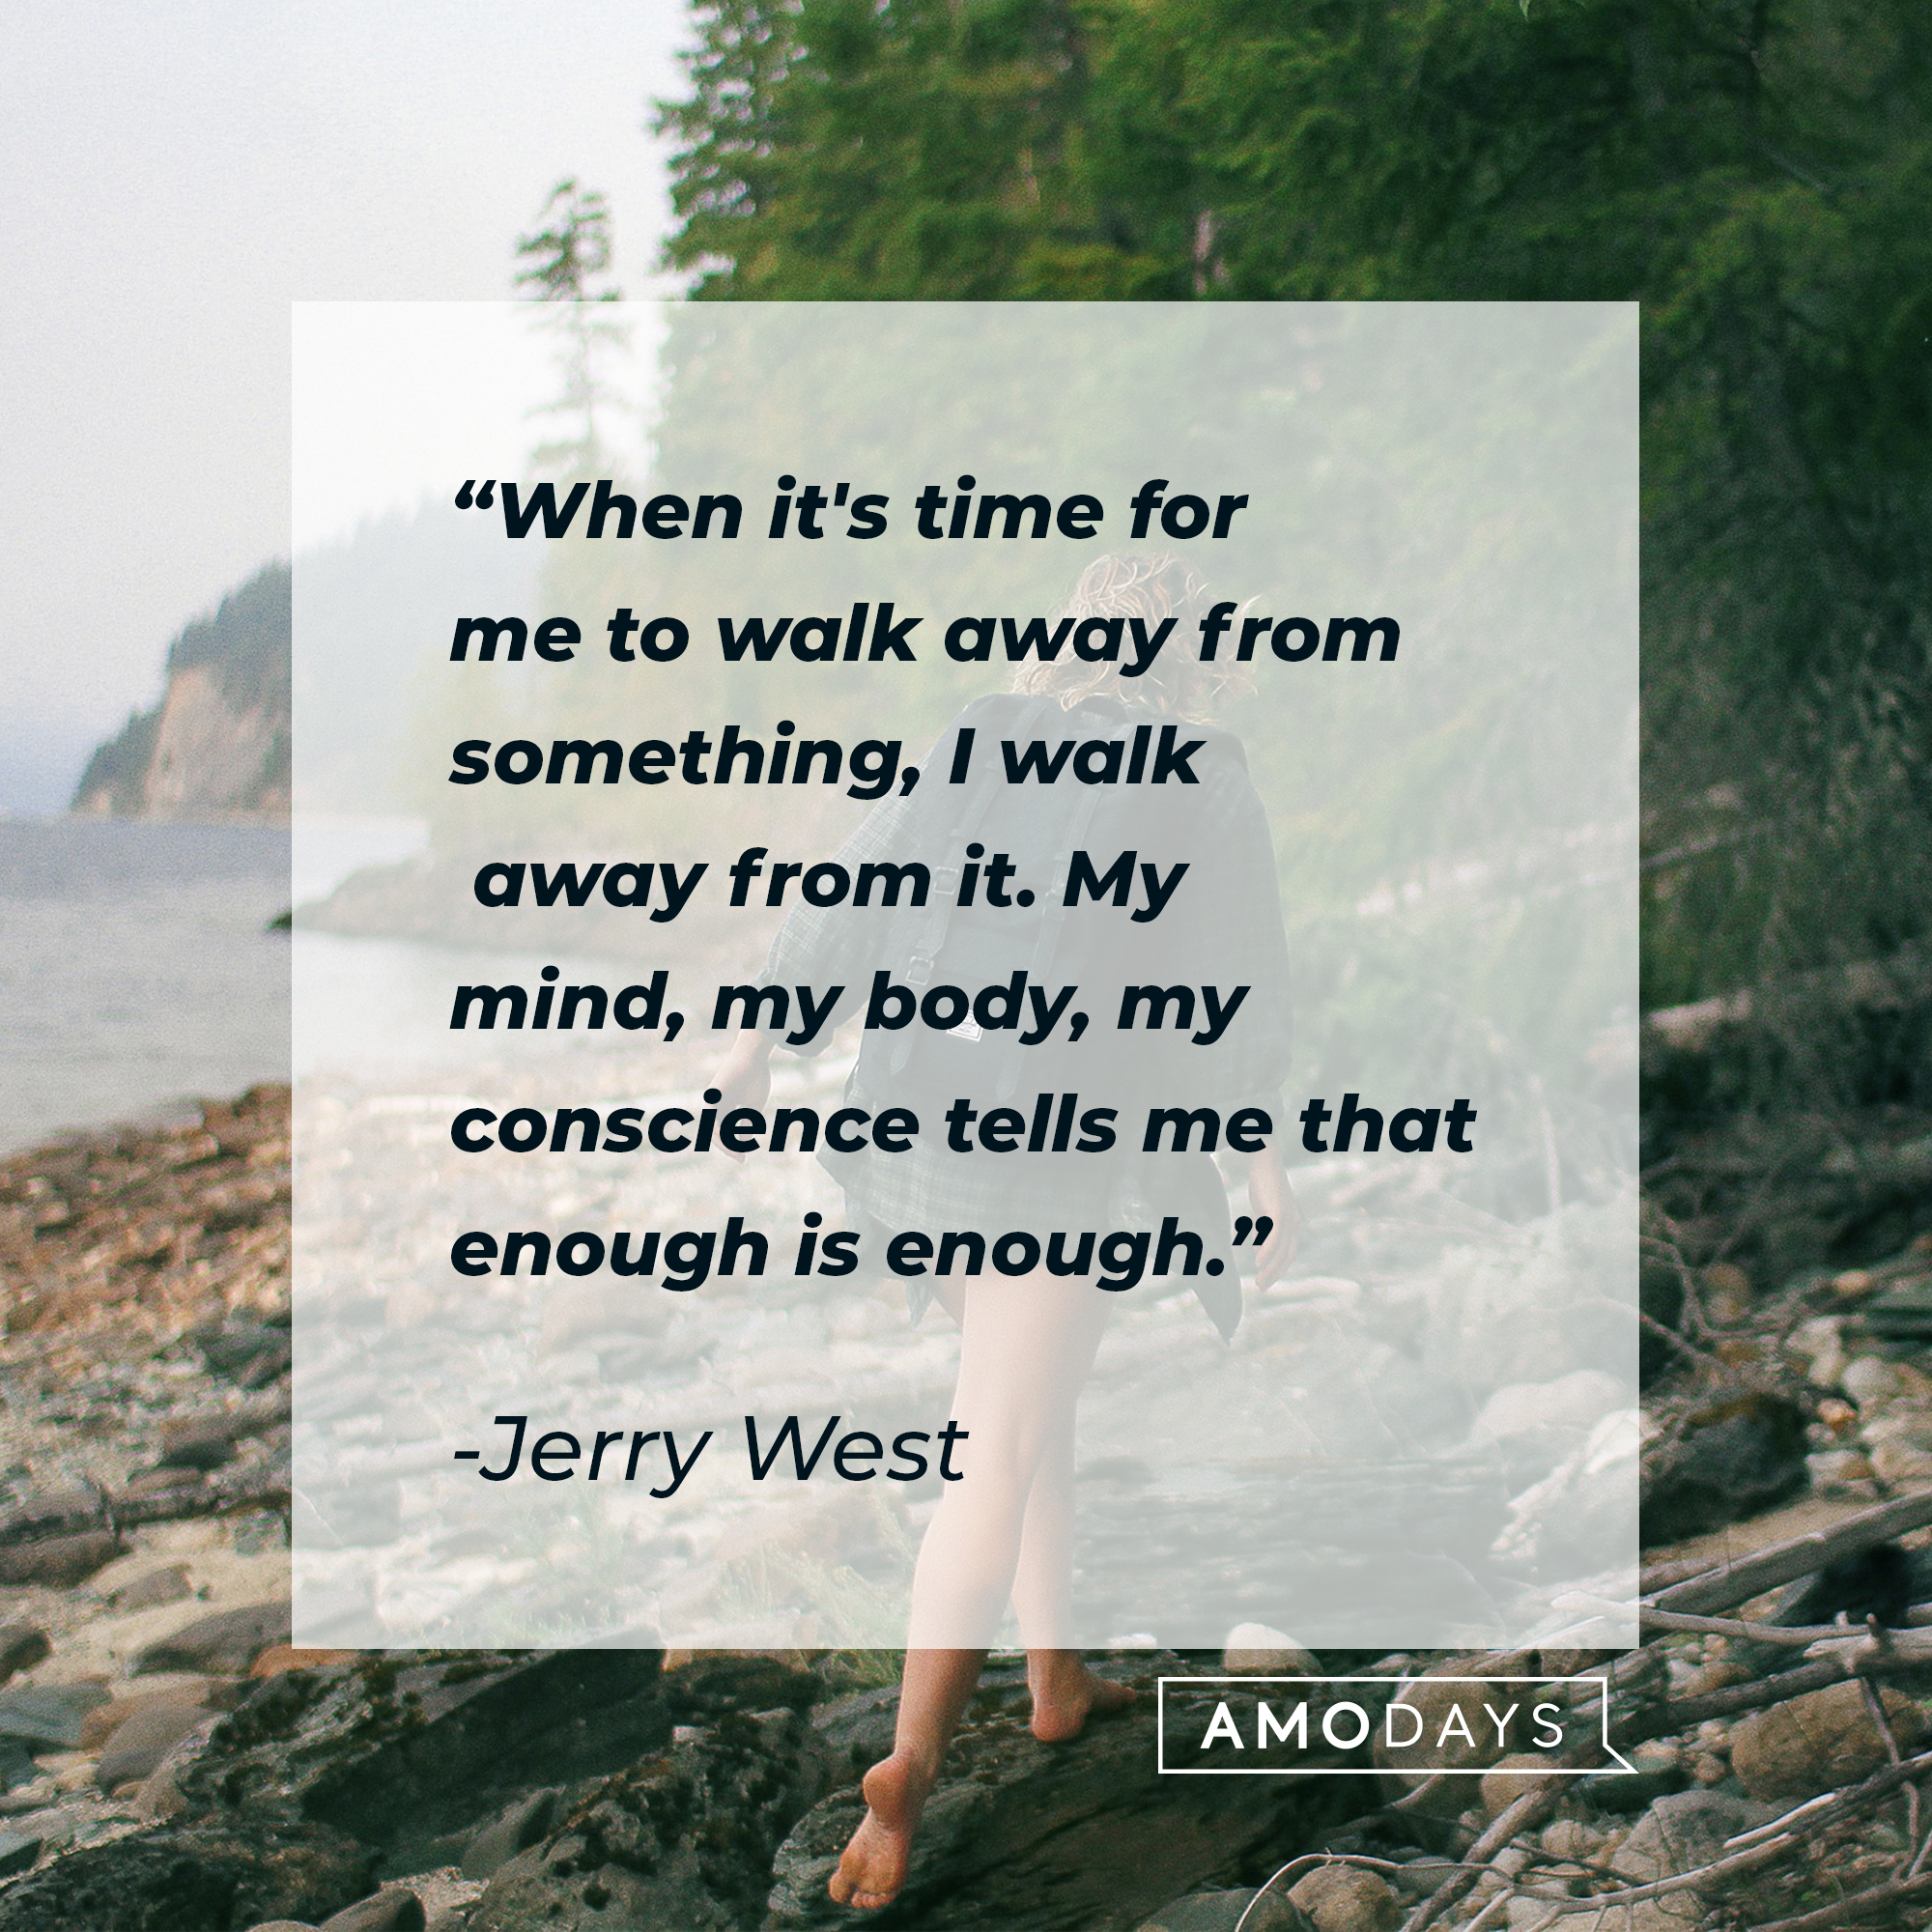 Jerry West's quote: "When it's time for me to walk away from something, I walk away from it. My mind, my body, my conscience tells me that enough is enough." | Image: Unsplash.com